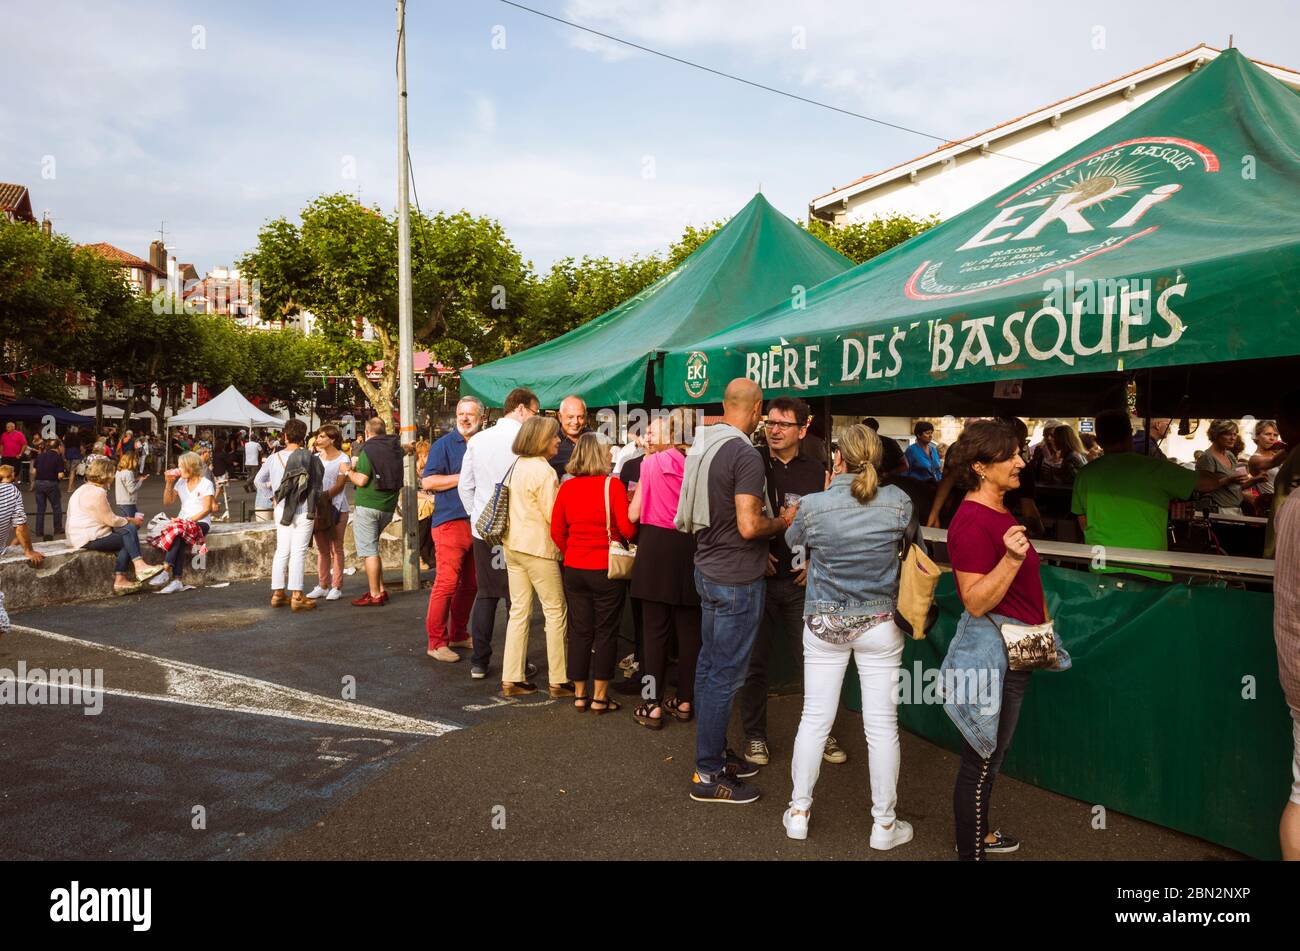 Saint Jean de Luz, French Basque Country, France - July 13th, 2019 : People stand next to a beer stall on Place Louis XIV during the Bastille Day, the Stock Photo